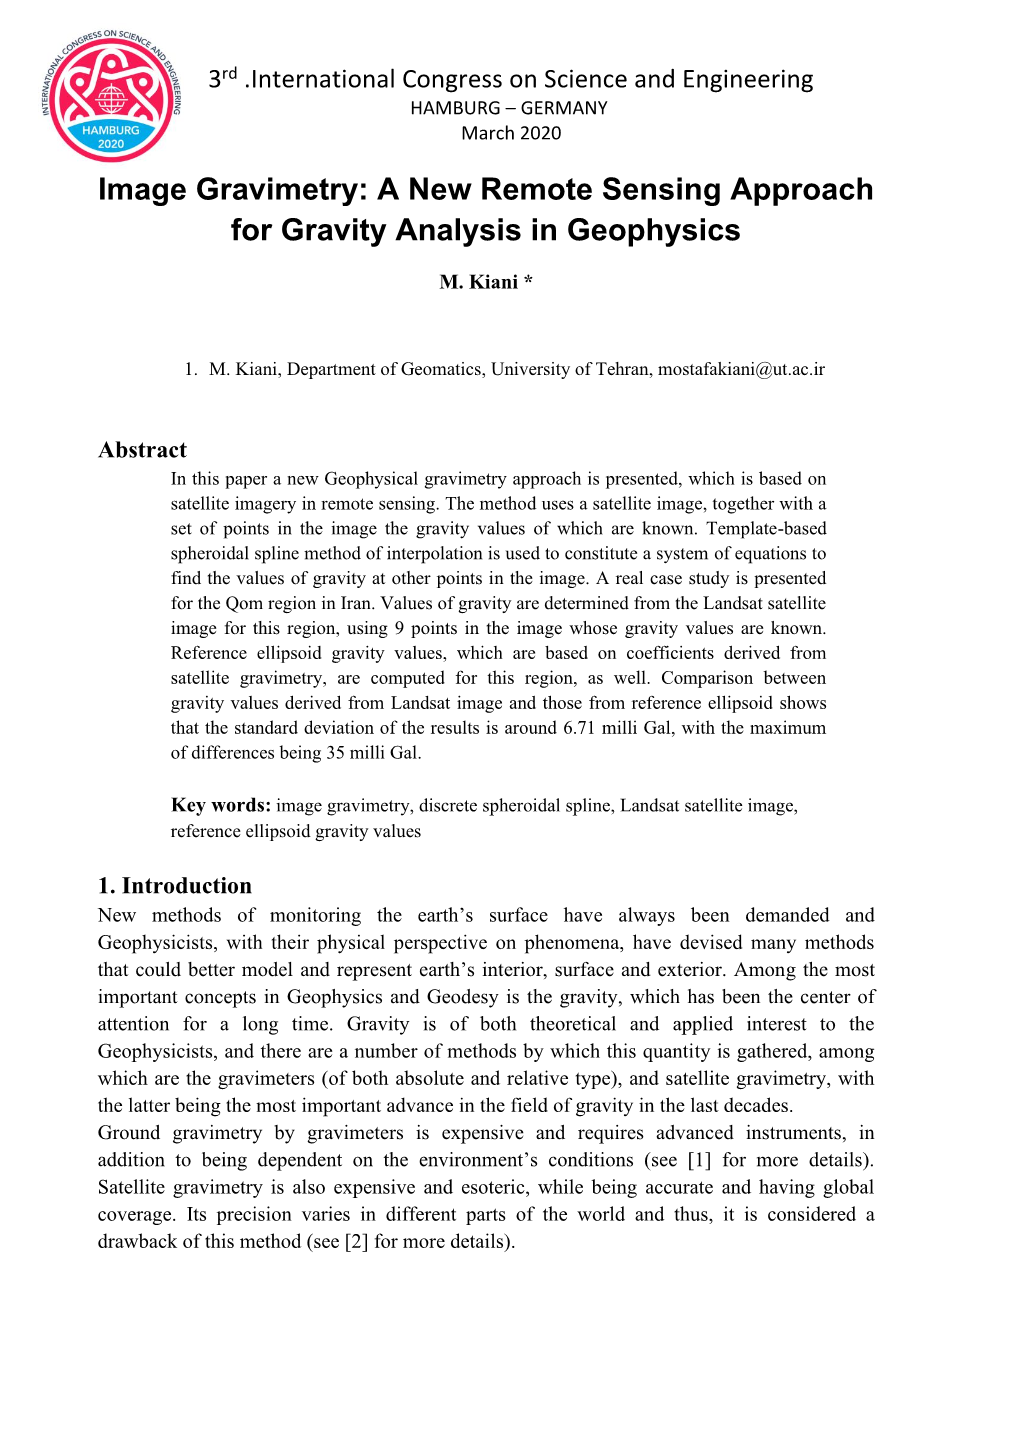 A New Remote Sensing Approach for Gravity Analysis in Geophysics